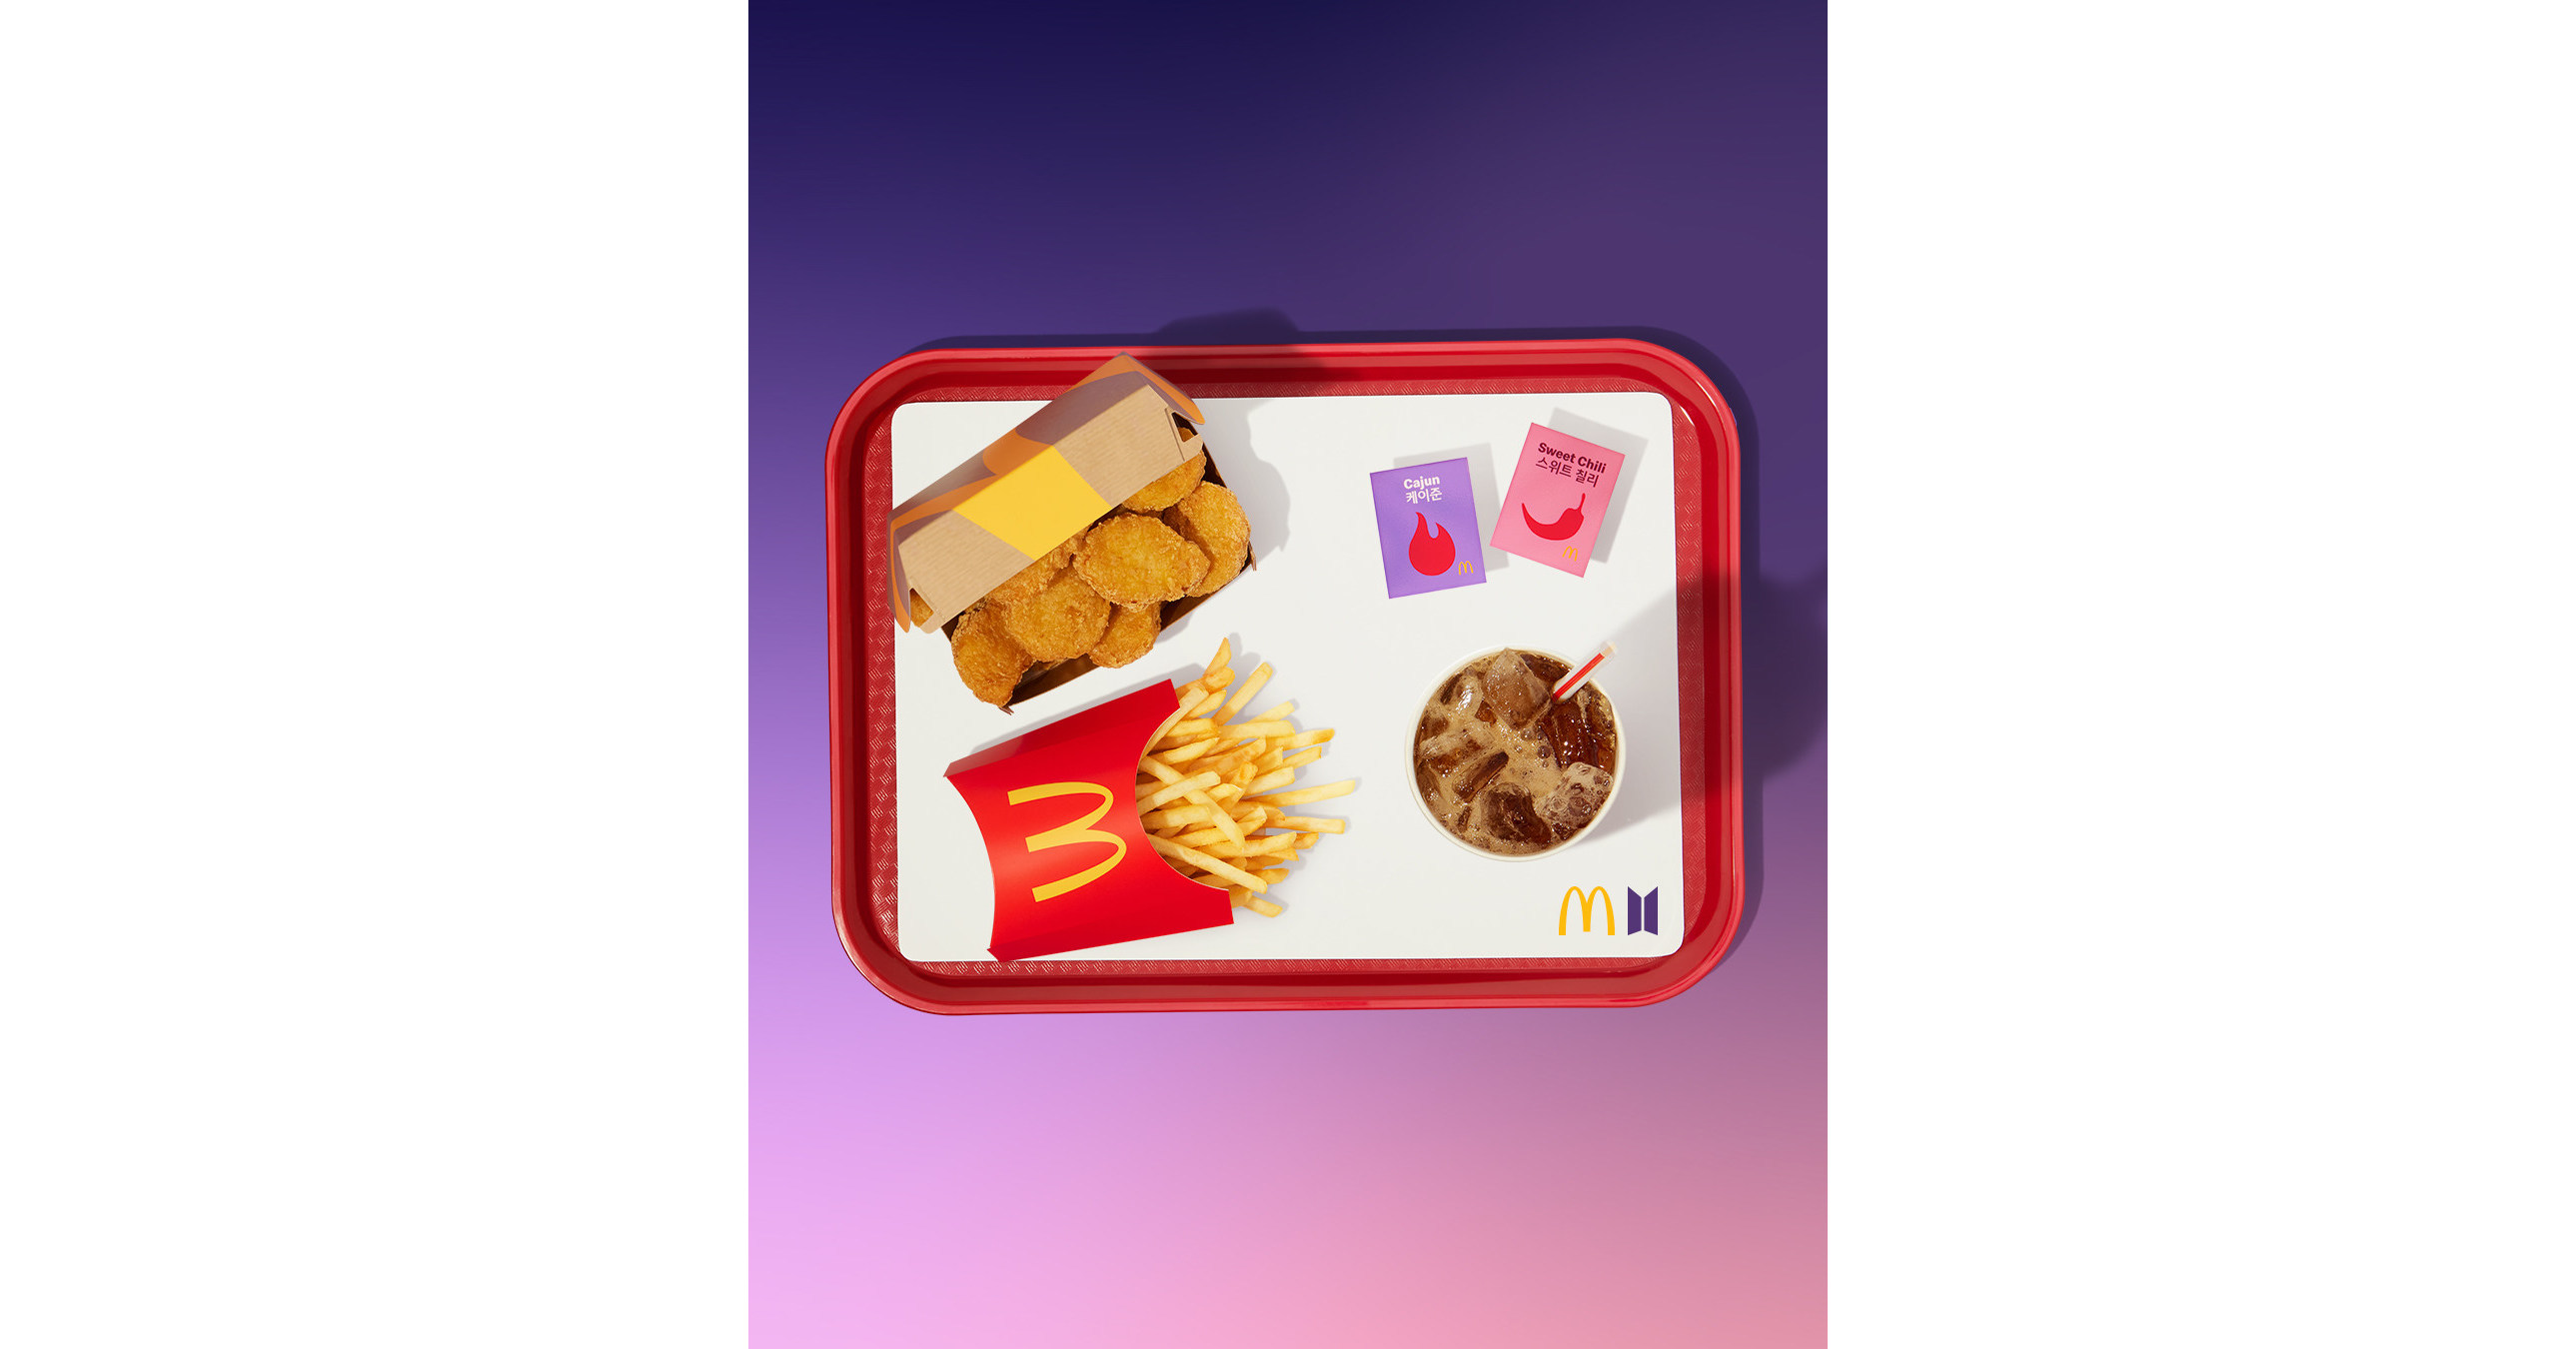 McDonald's New BTS Merch Will Be Available Starting Tonight